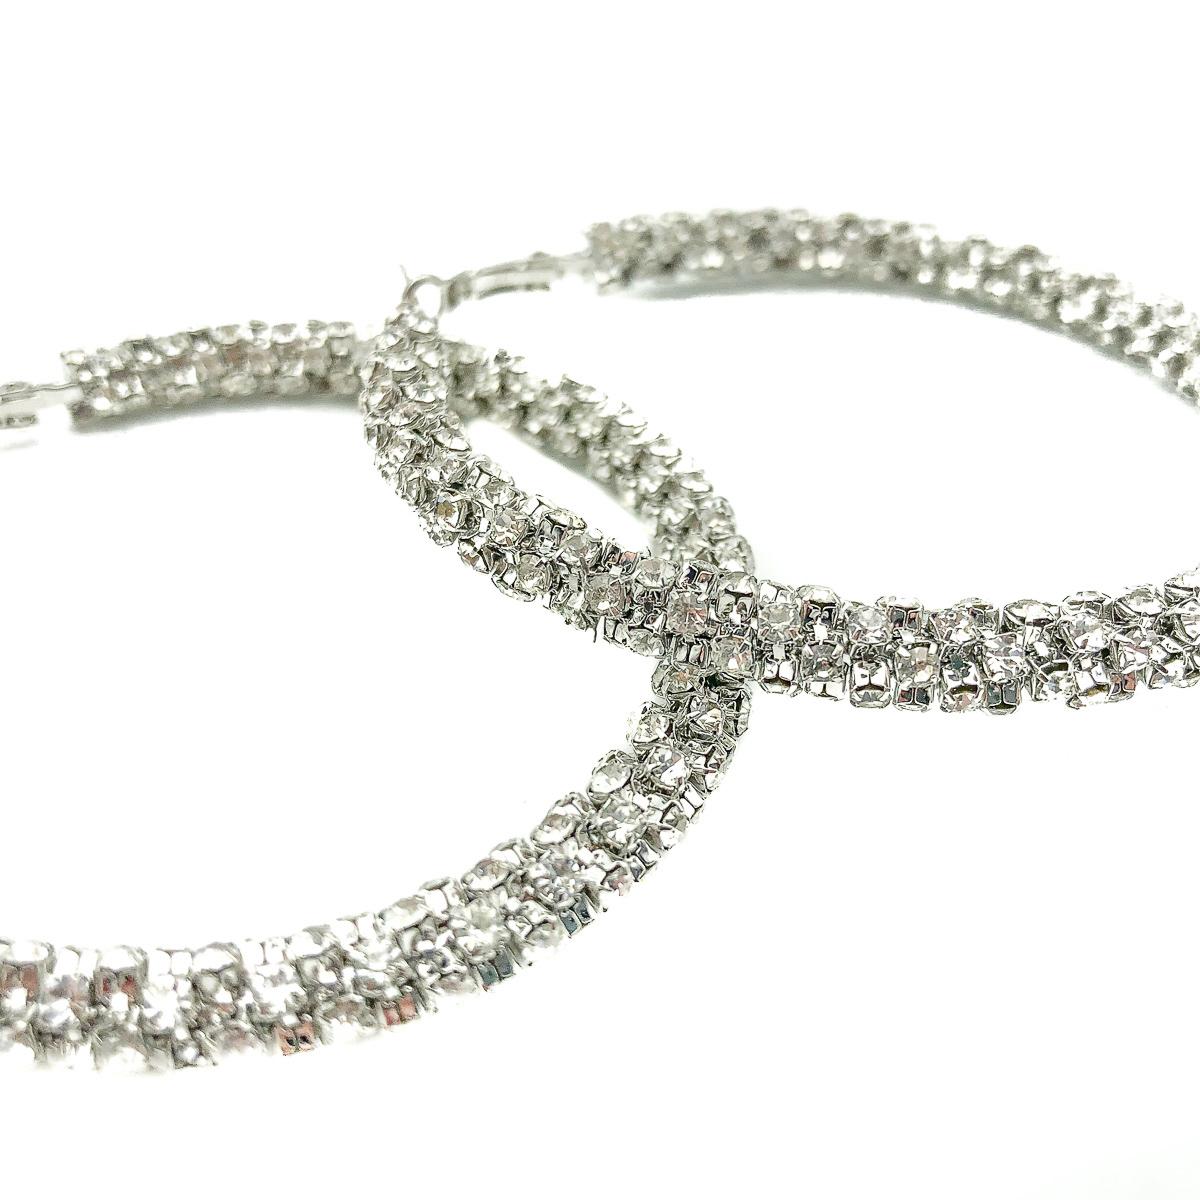 Oversize Crystal Hoop Earrings. Crafted in silver tone metal with heaps of claw set crystal chaton stones for full sparkle effect.  In very good condition, signed, approx. 6cms diameter. Channel your inner goddess and go for it. 

Established in